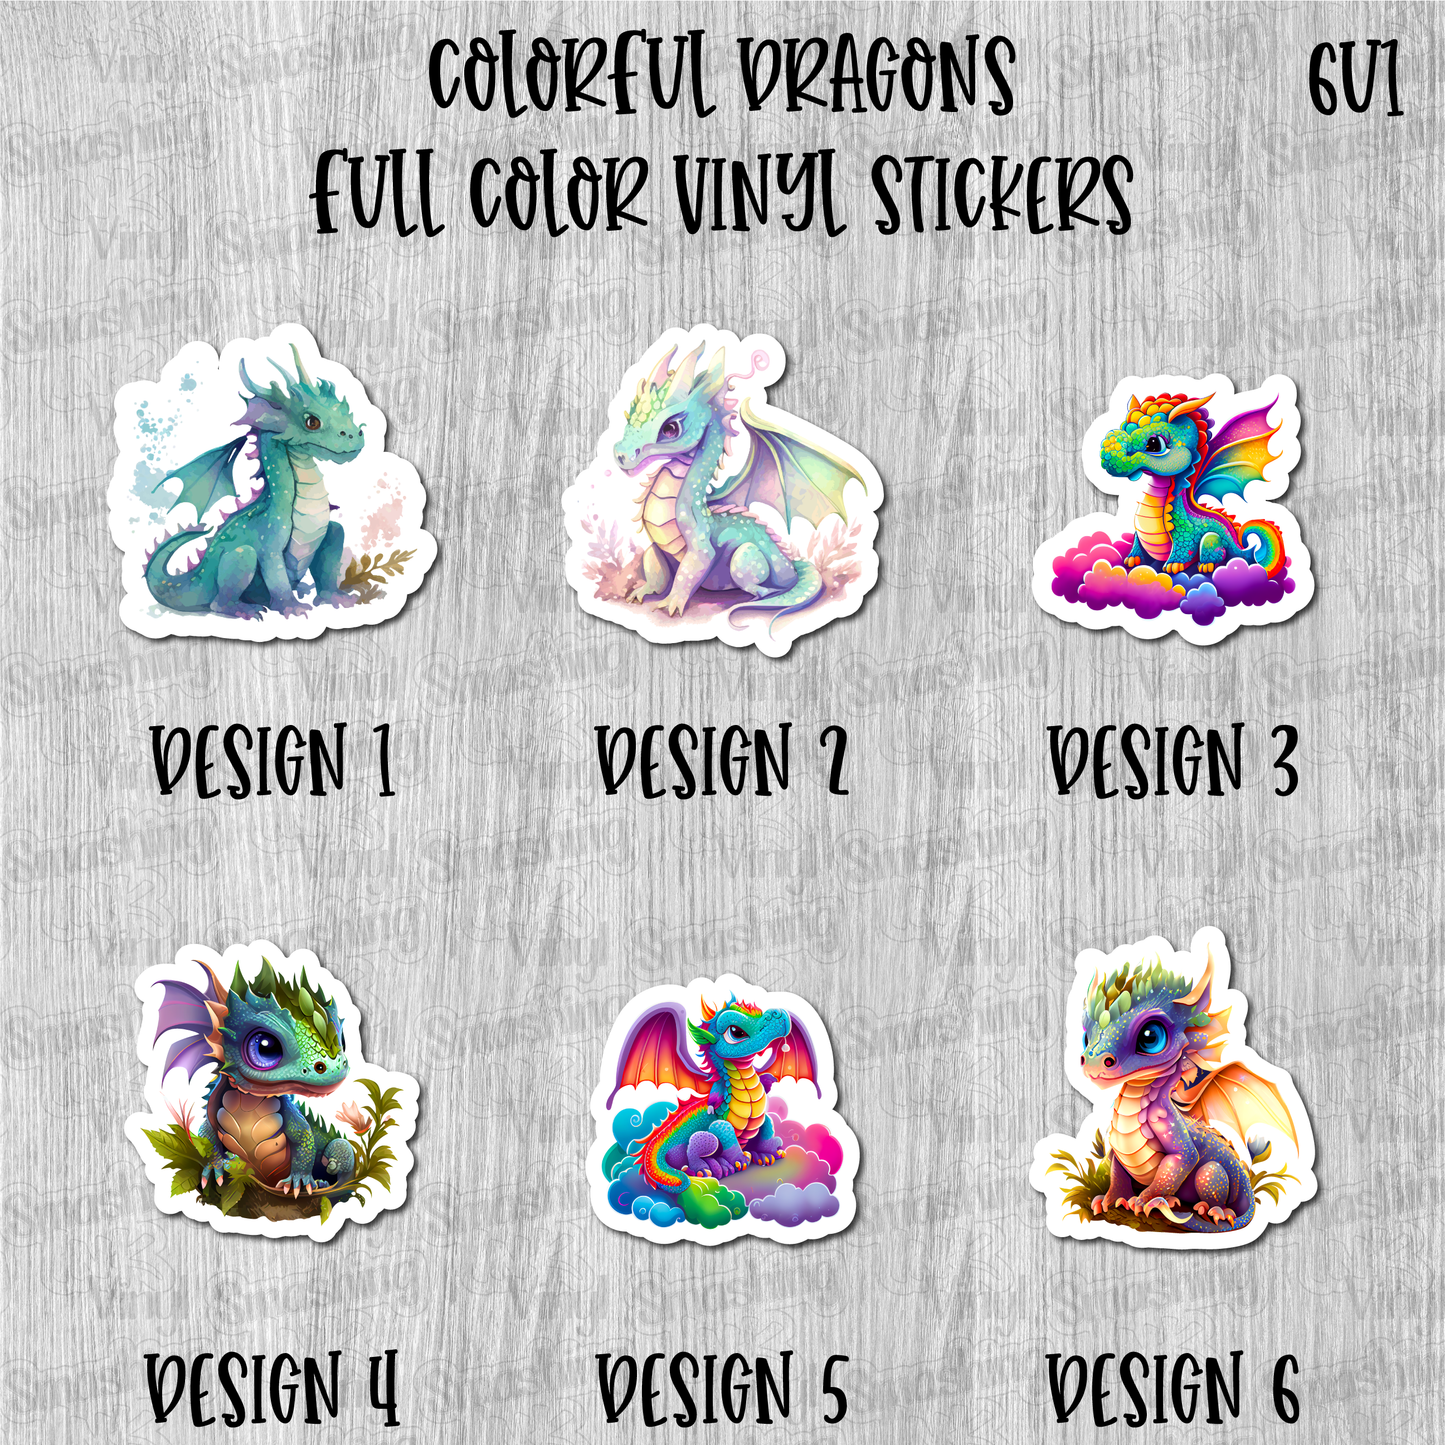 Colorful Dragons - Full Color Vinyl Stickers (SHIPS IN 3-7 BUS DAYS)